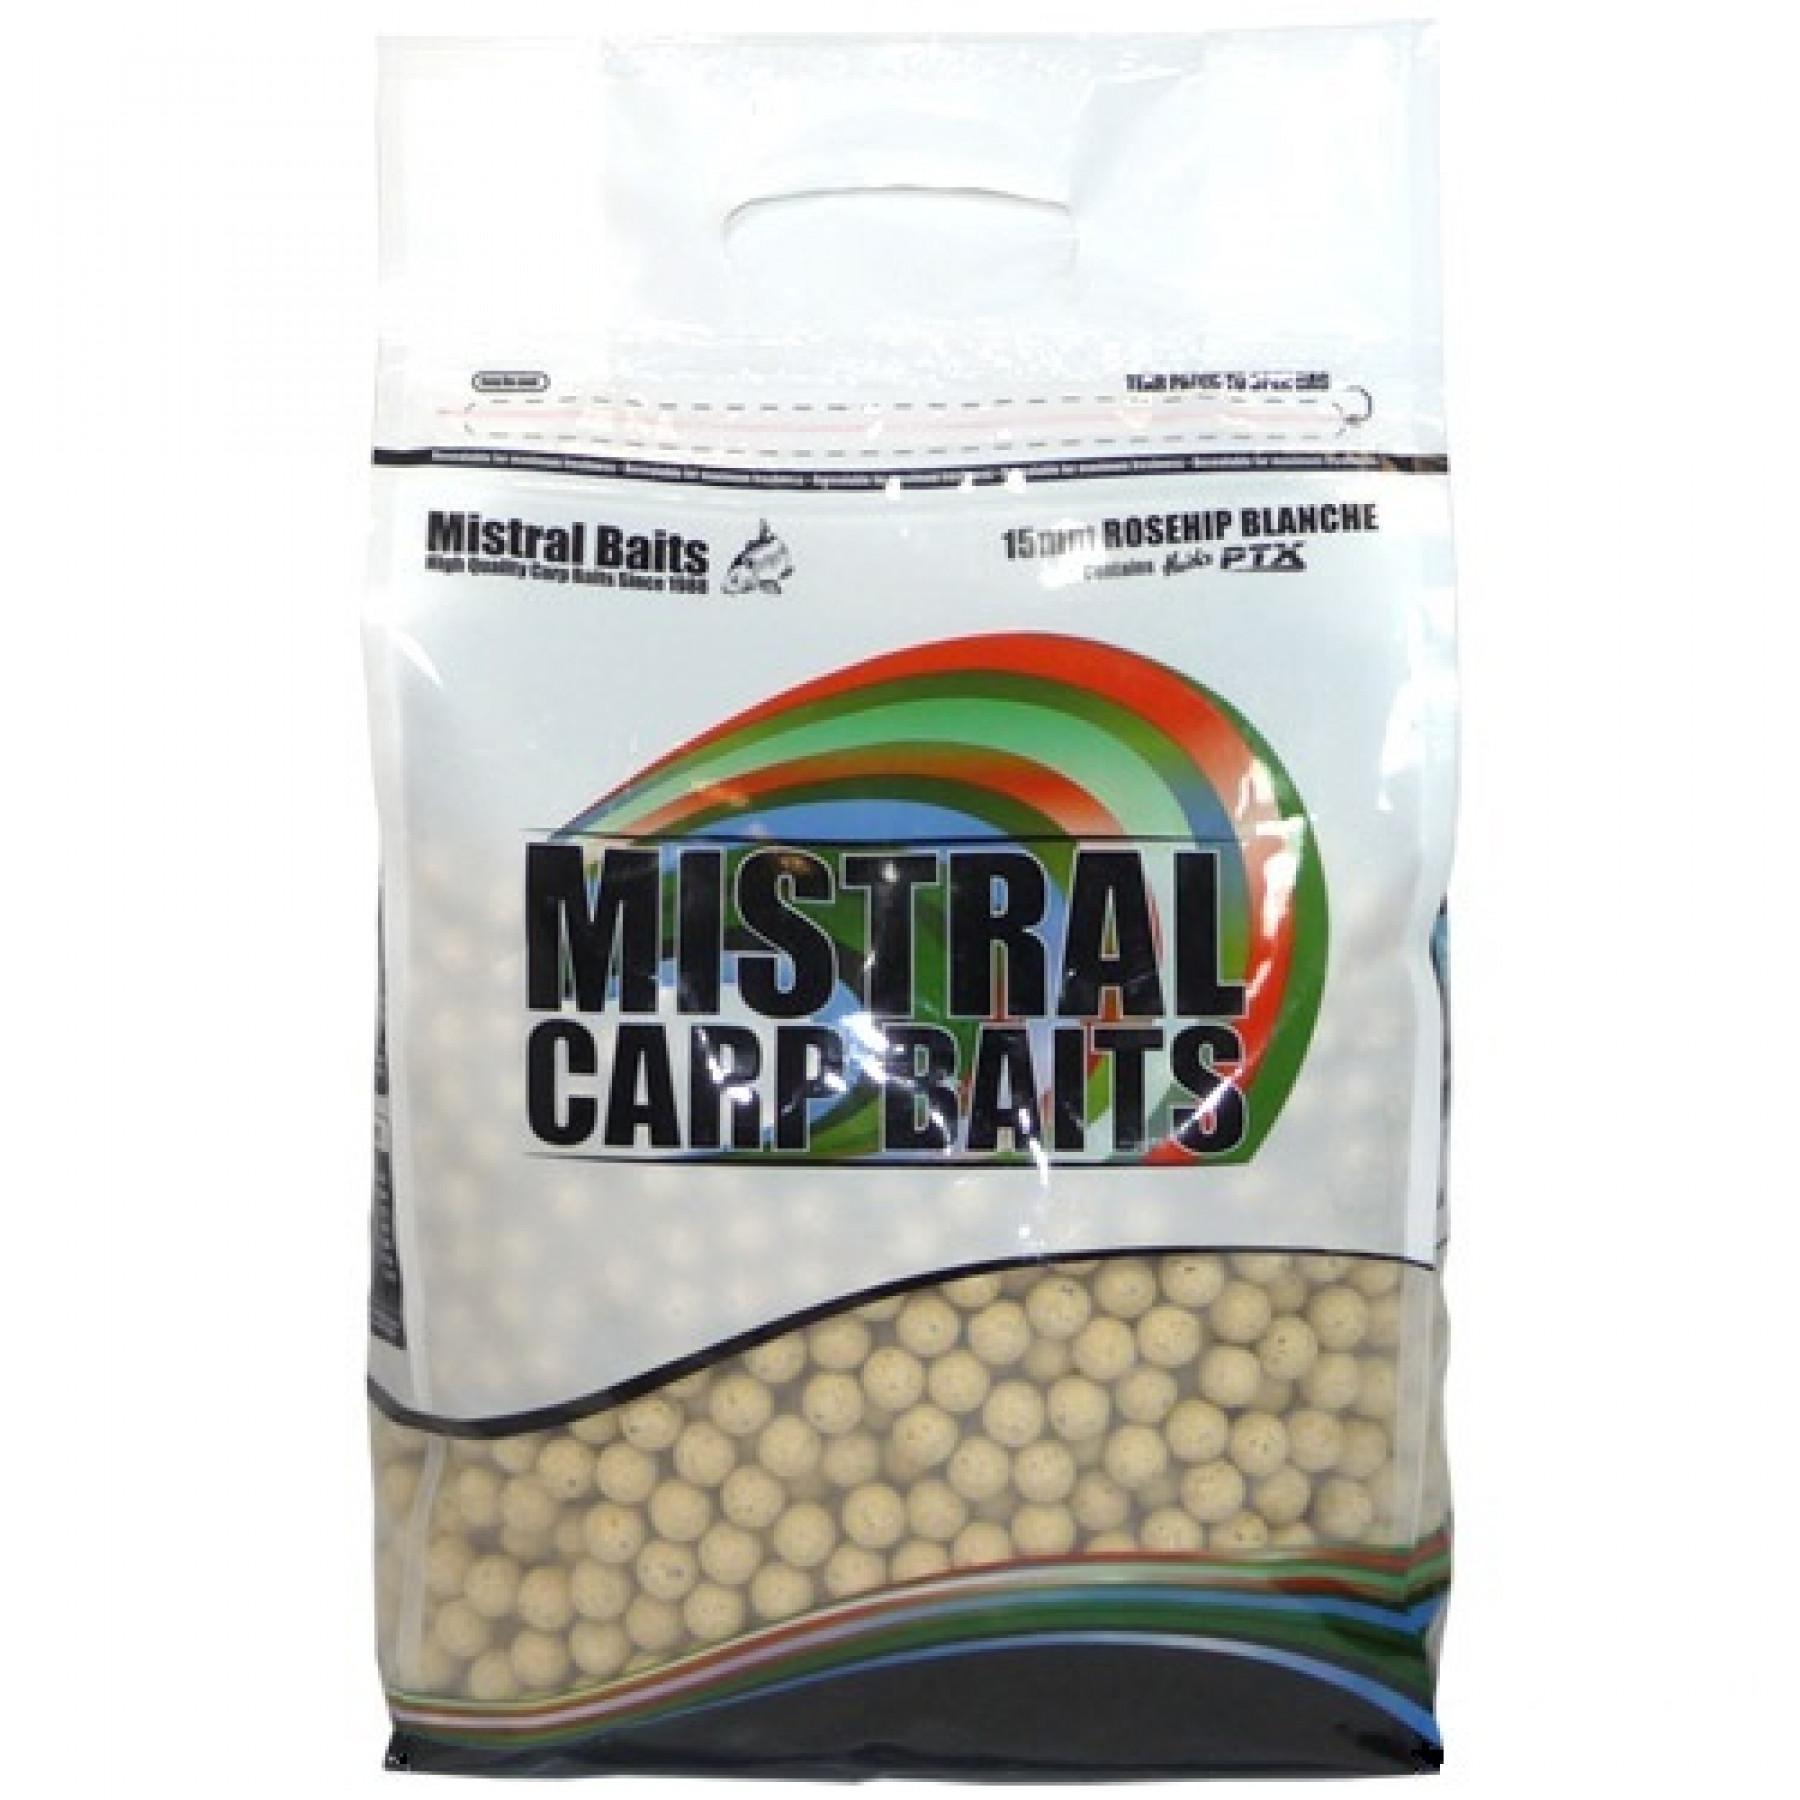 Mistral Baits 15mm 5kg Rosehip Blanche boilies